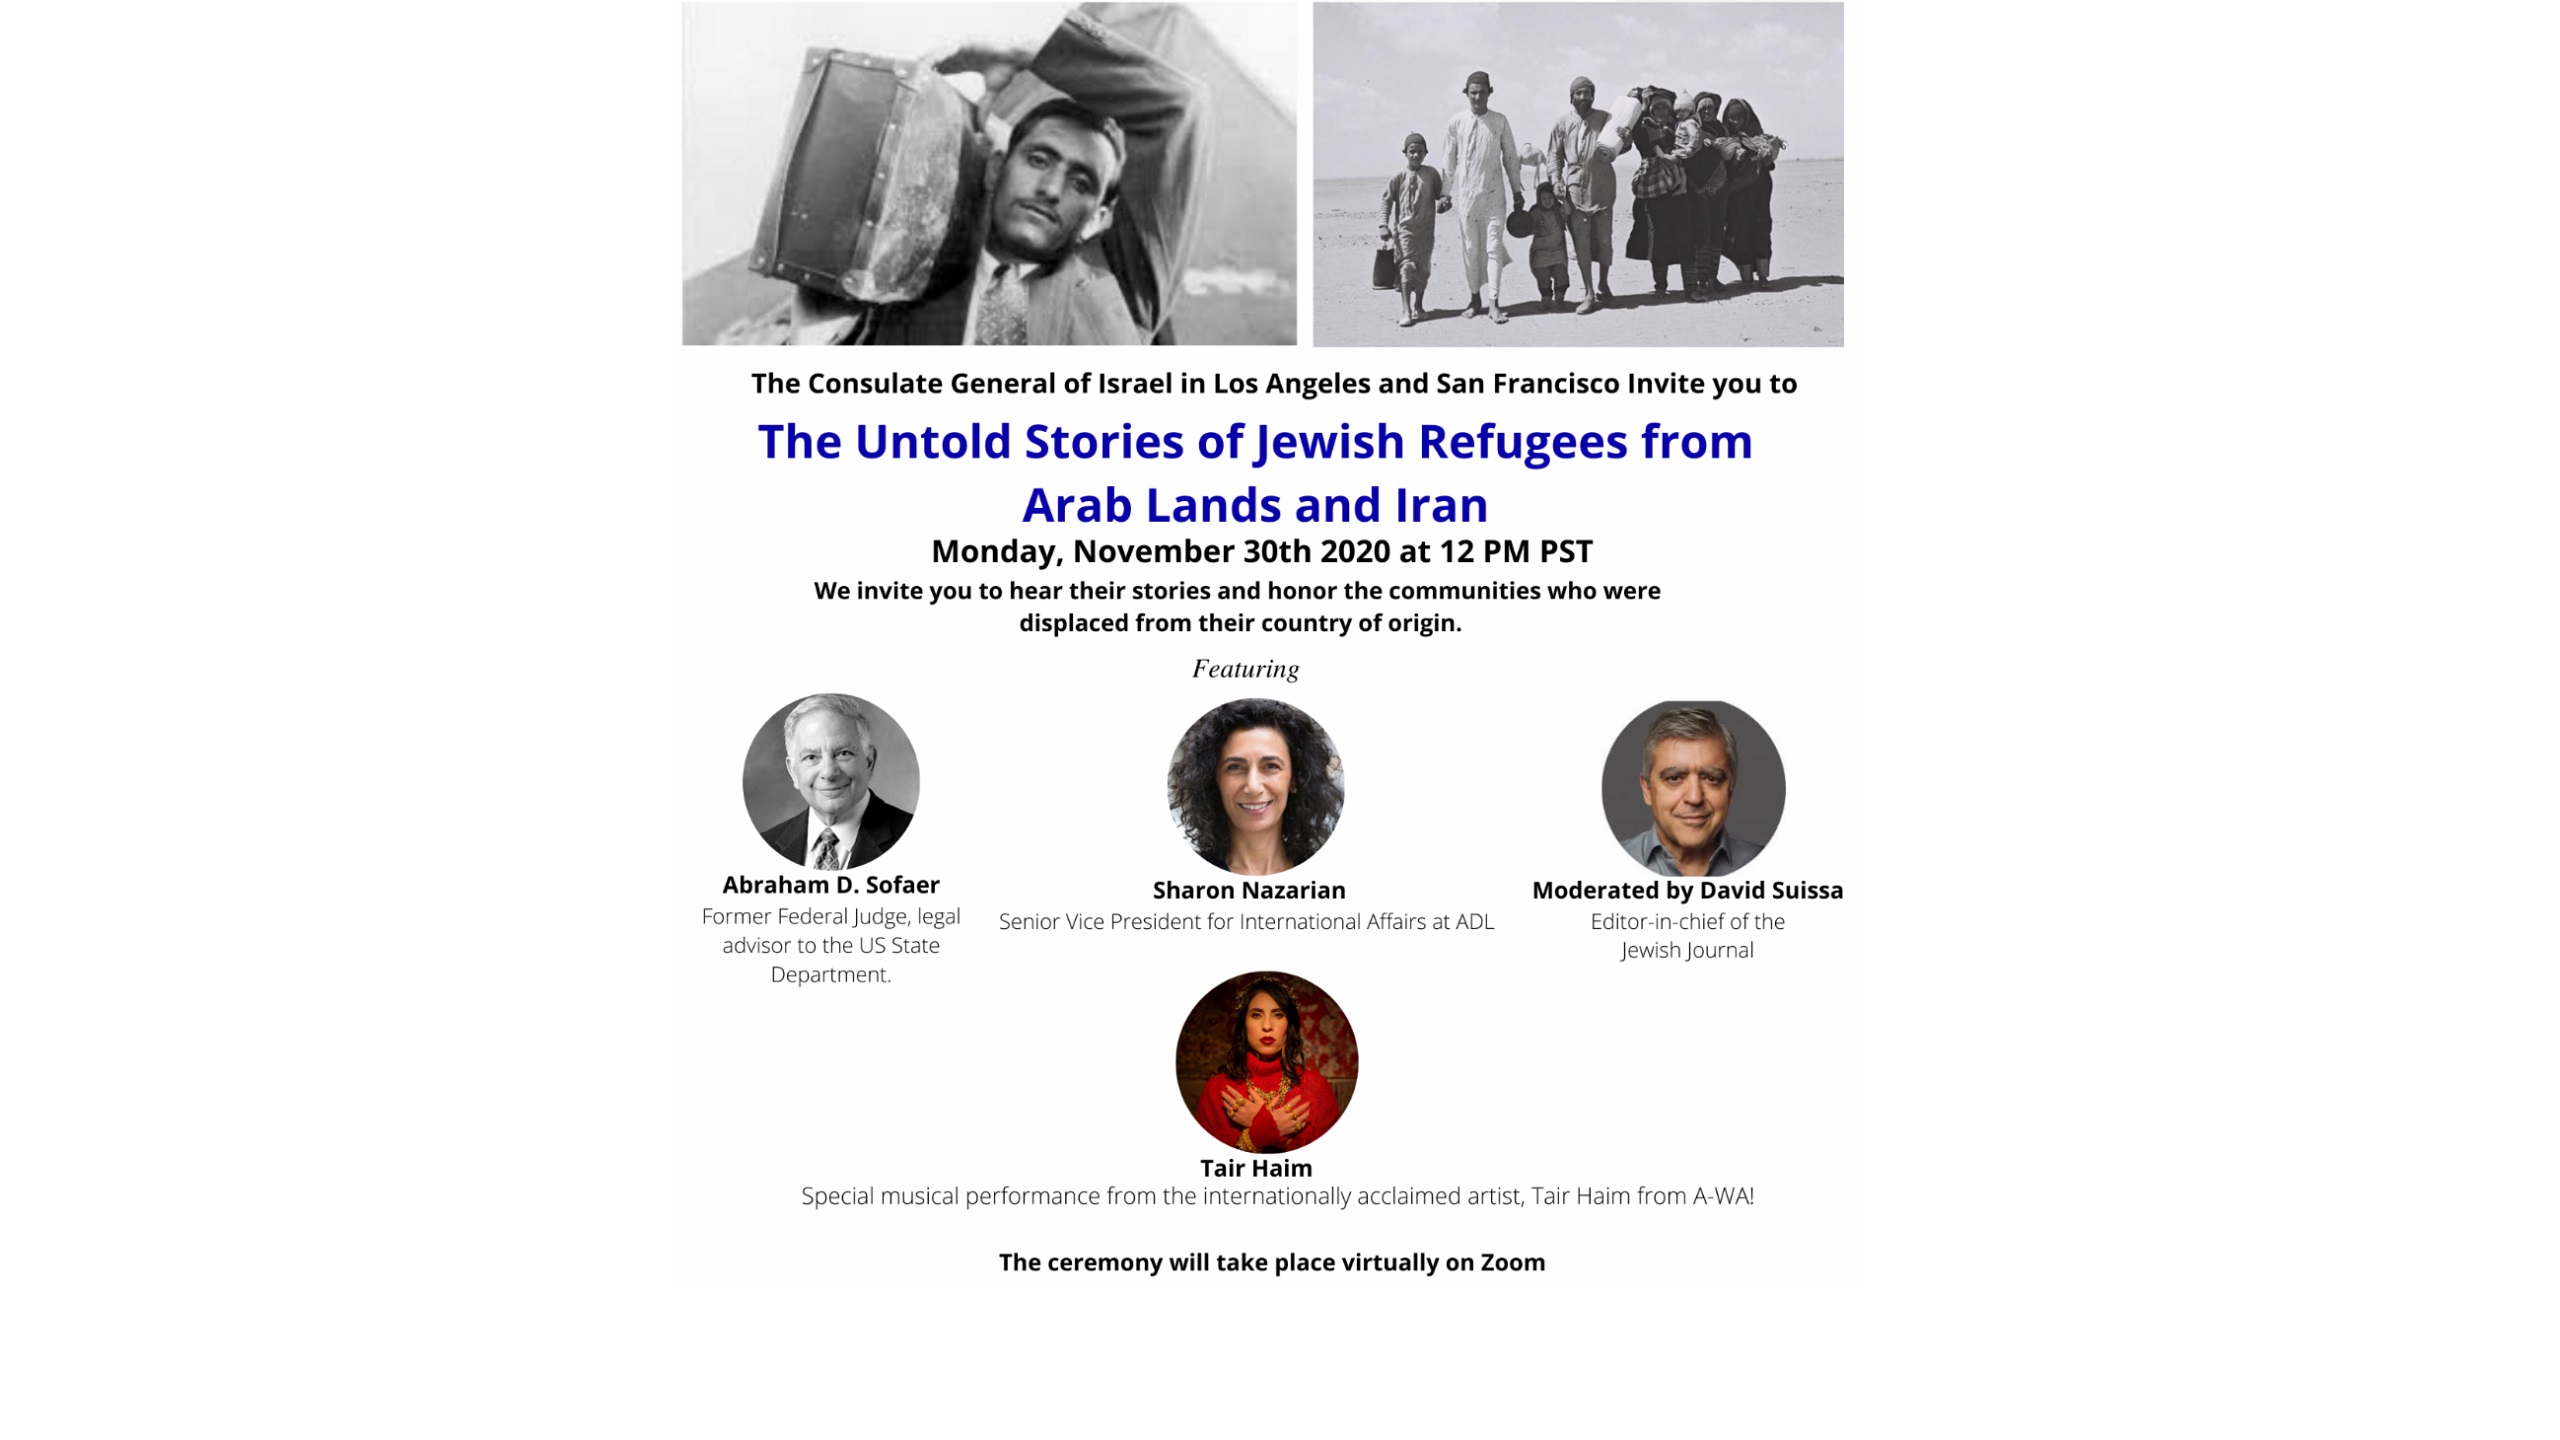 Commemorate the Untold Stories of Jewish Refugees from Arab Lands and Iran